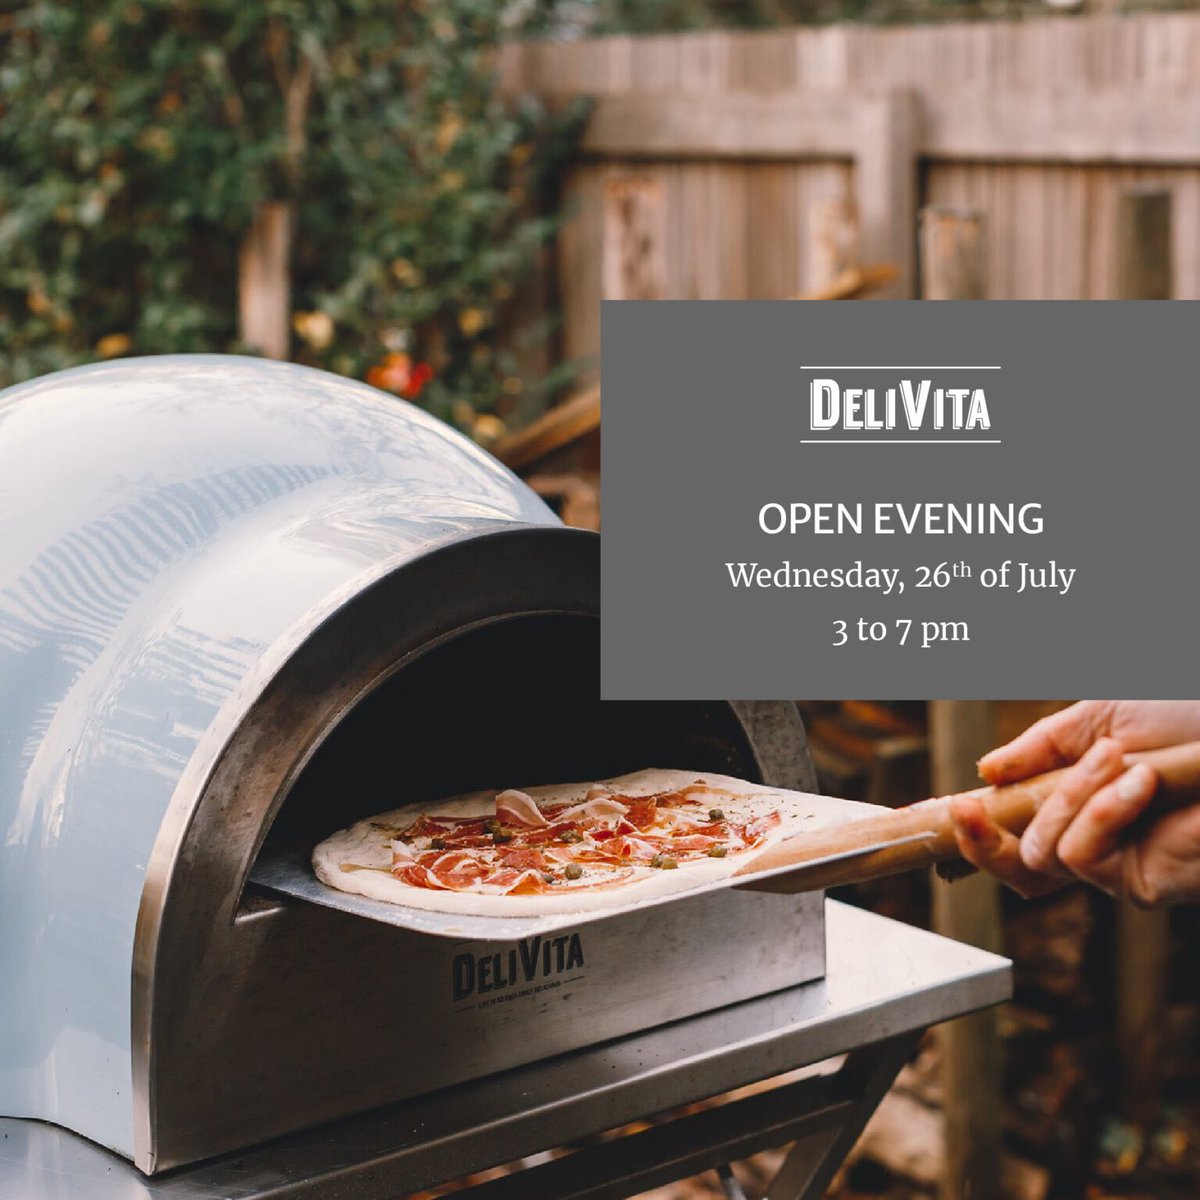 Tomorrow @kslsudbury a beautiful outdoor kitchen event with the lovely Marco from @HelloDelivita cooking up a storm 
Why not call in and see the best wood fired oven in action